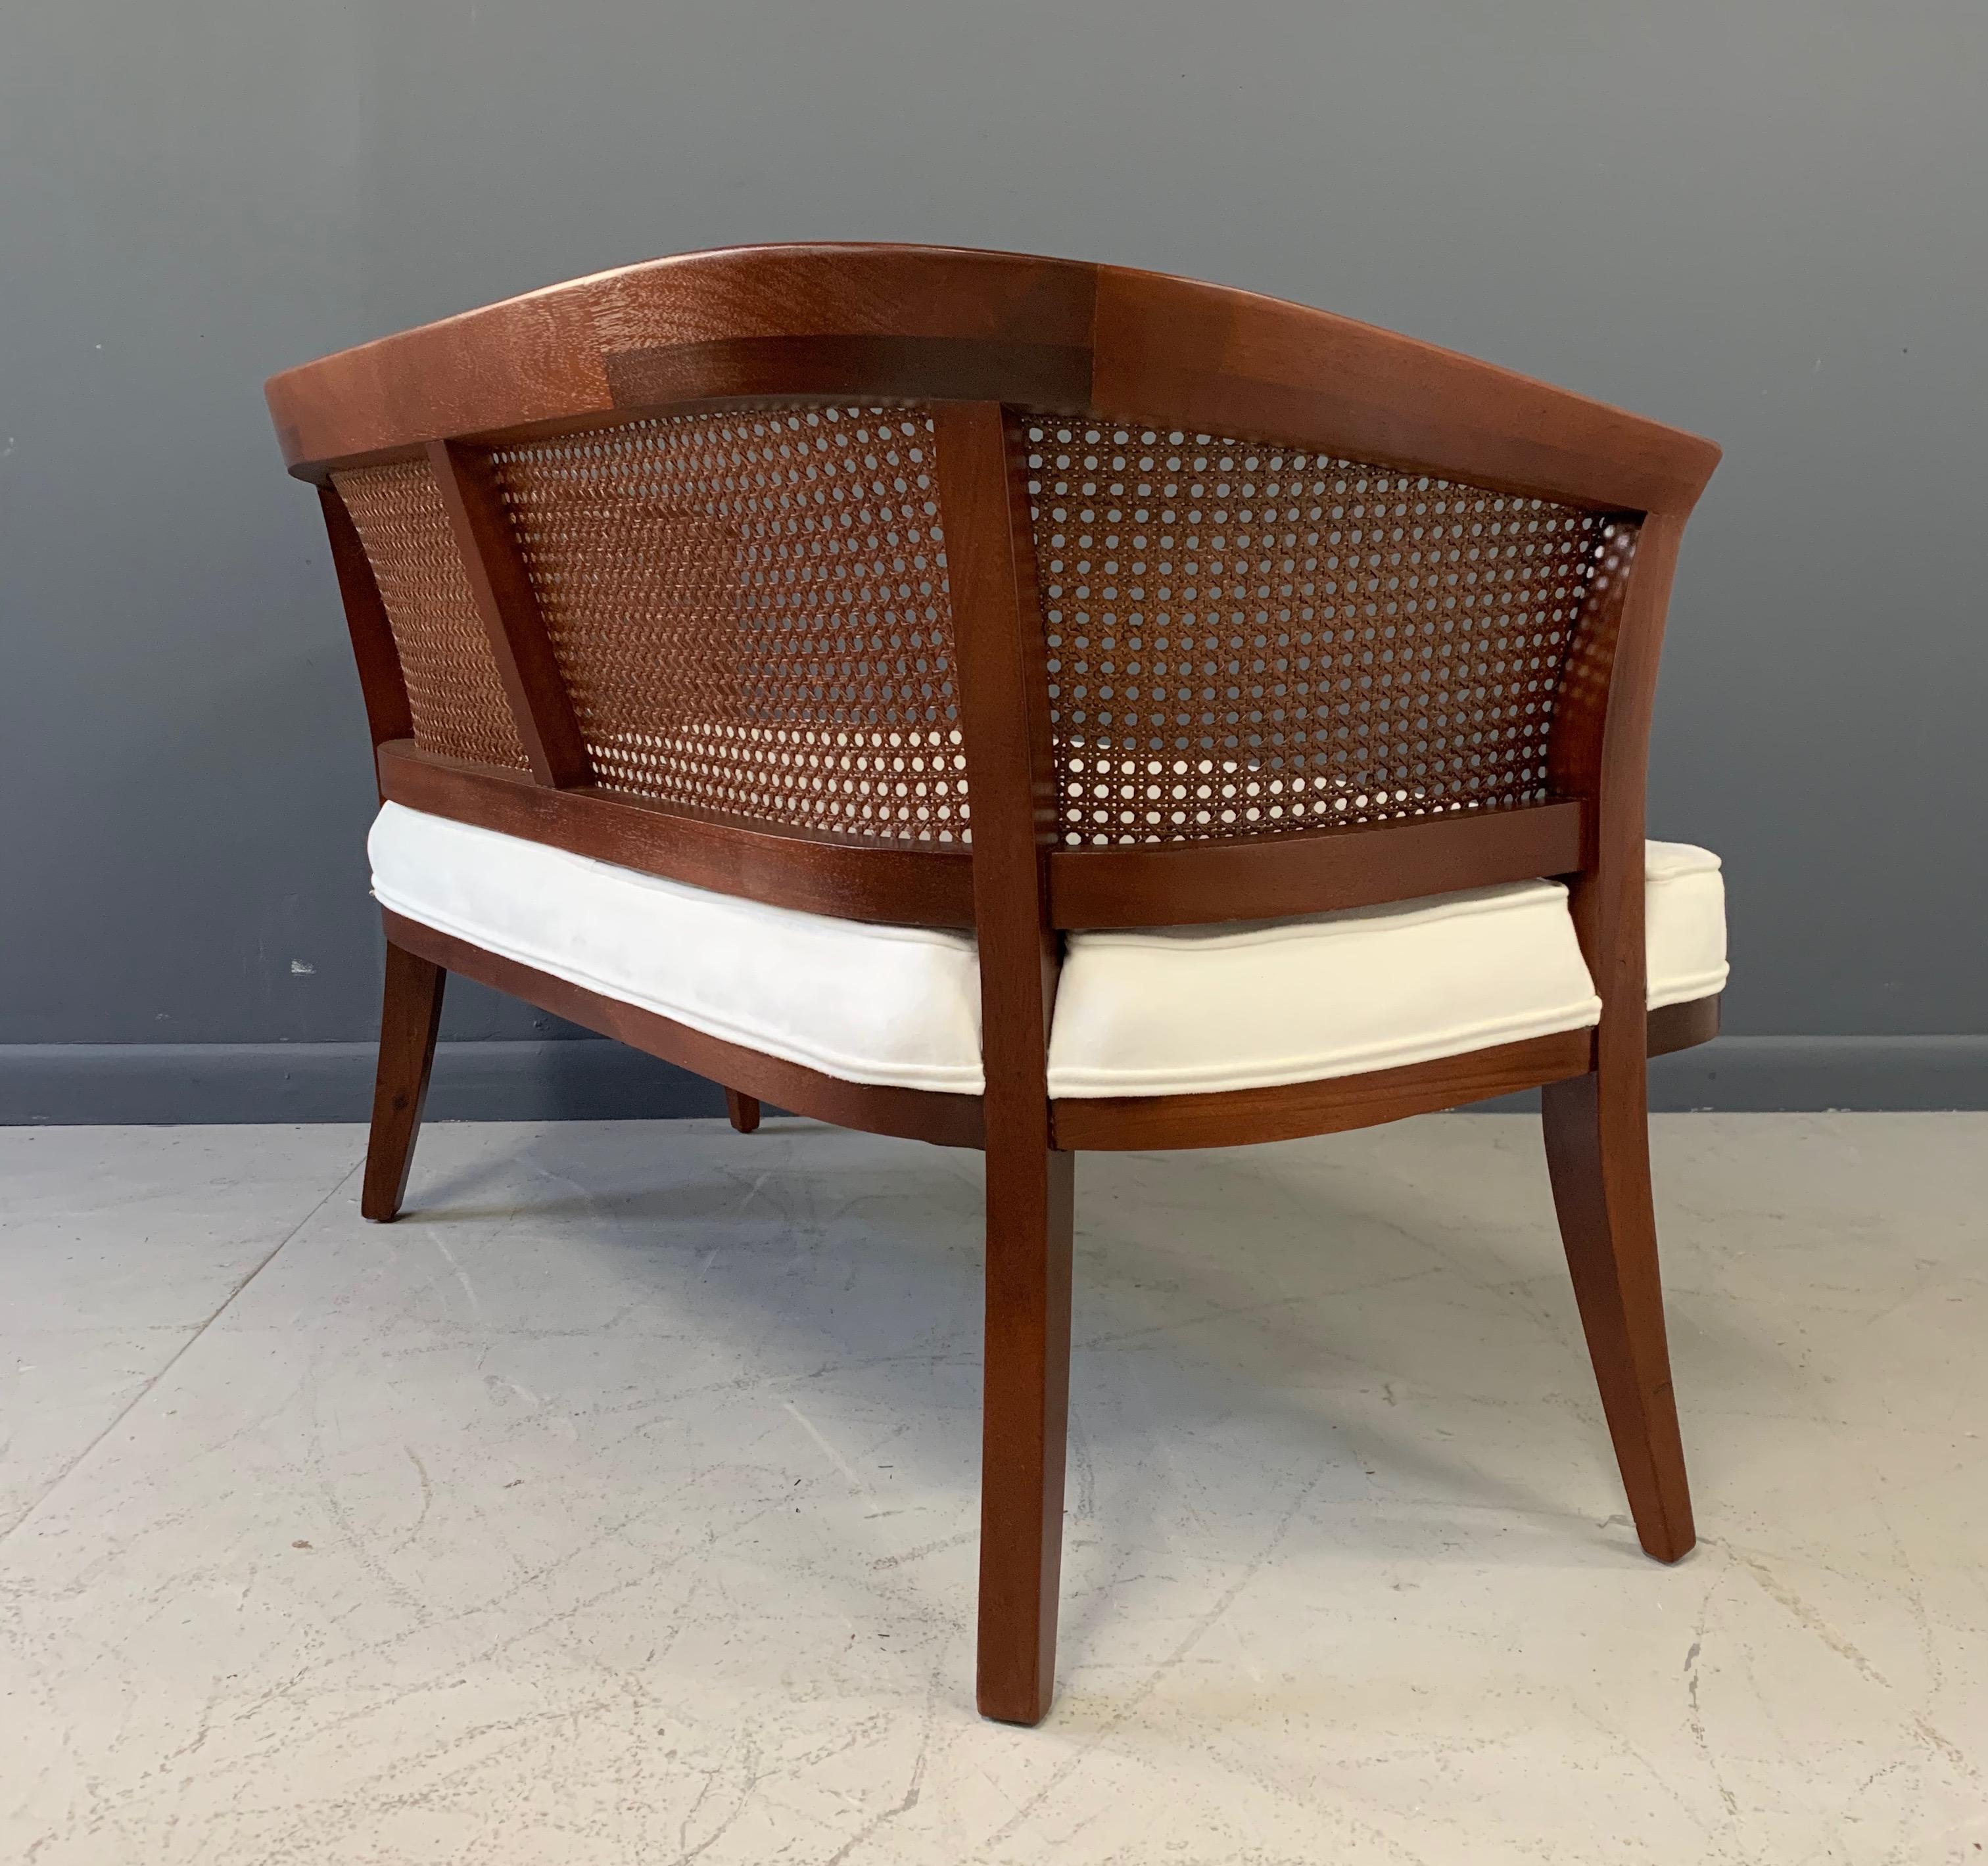 20th Century Midcentury Mahogany, Cane and Upholstered Bench in the Style of Edward Wormley